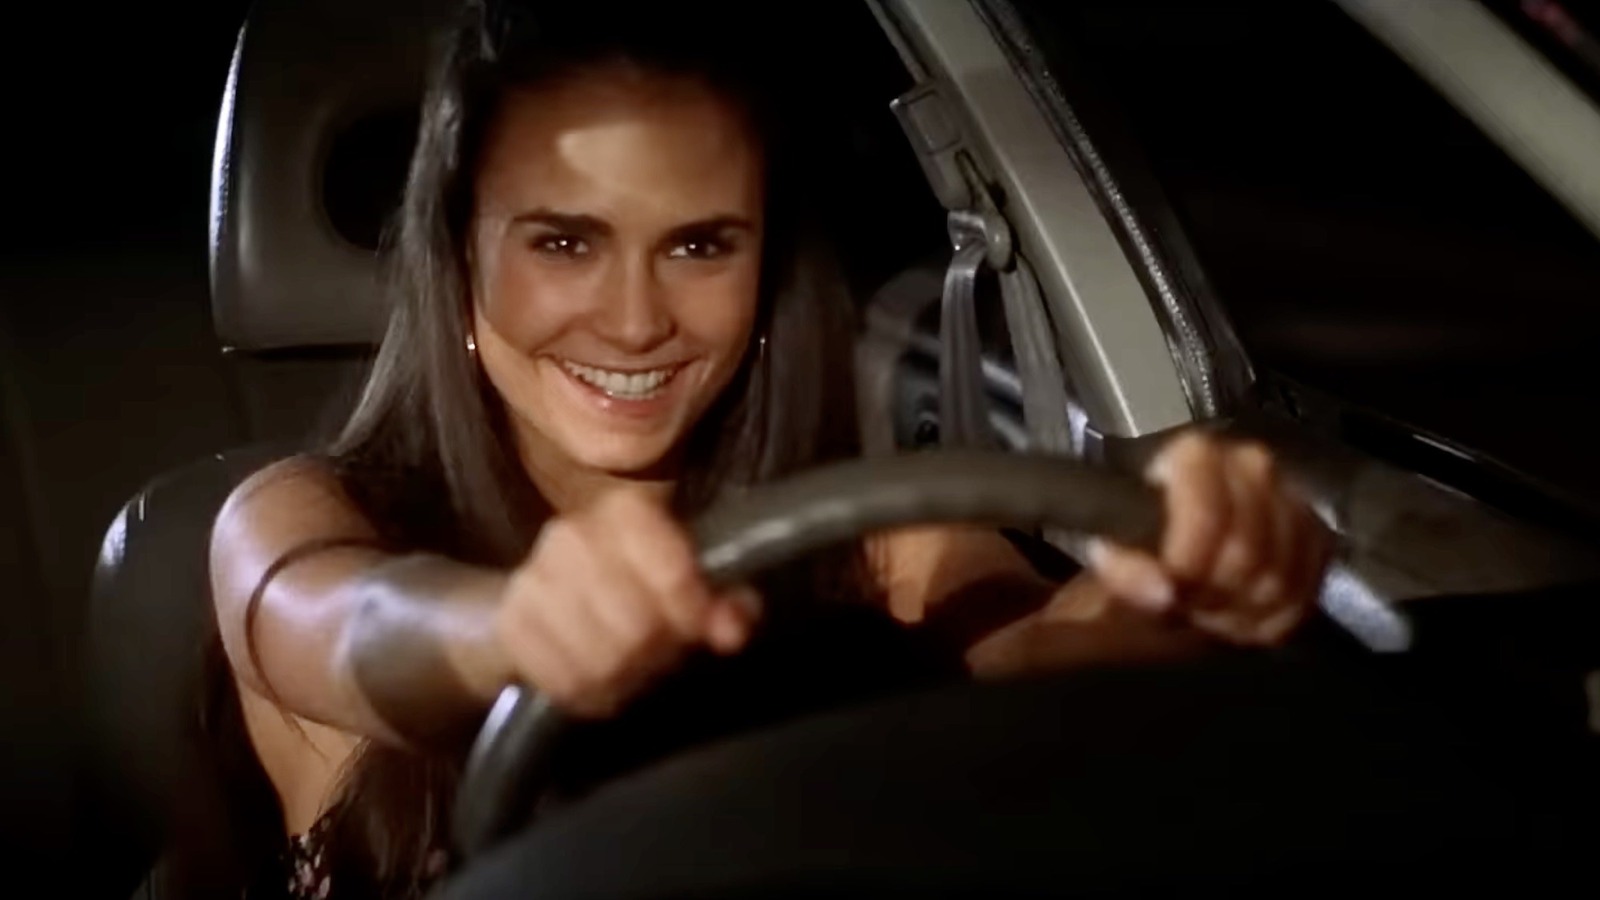 The fast and furious stars who got their driver's license in no time